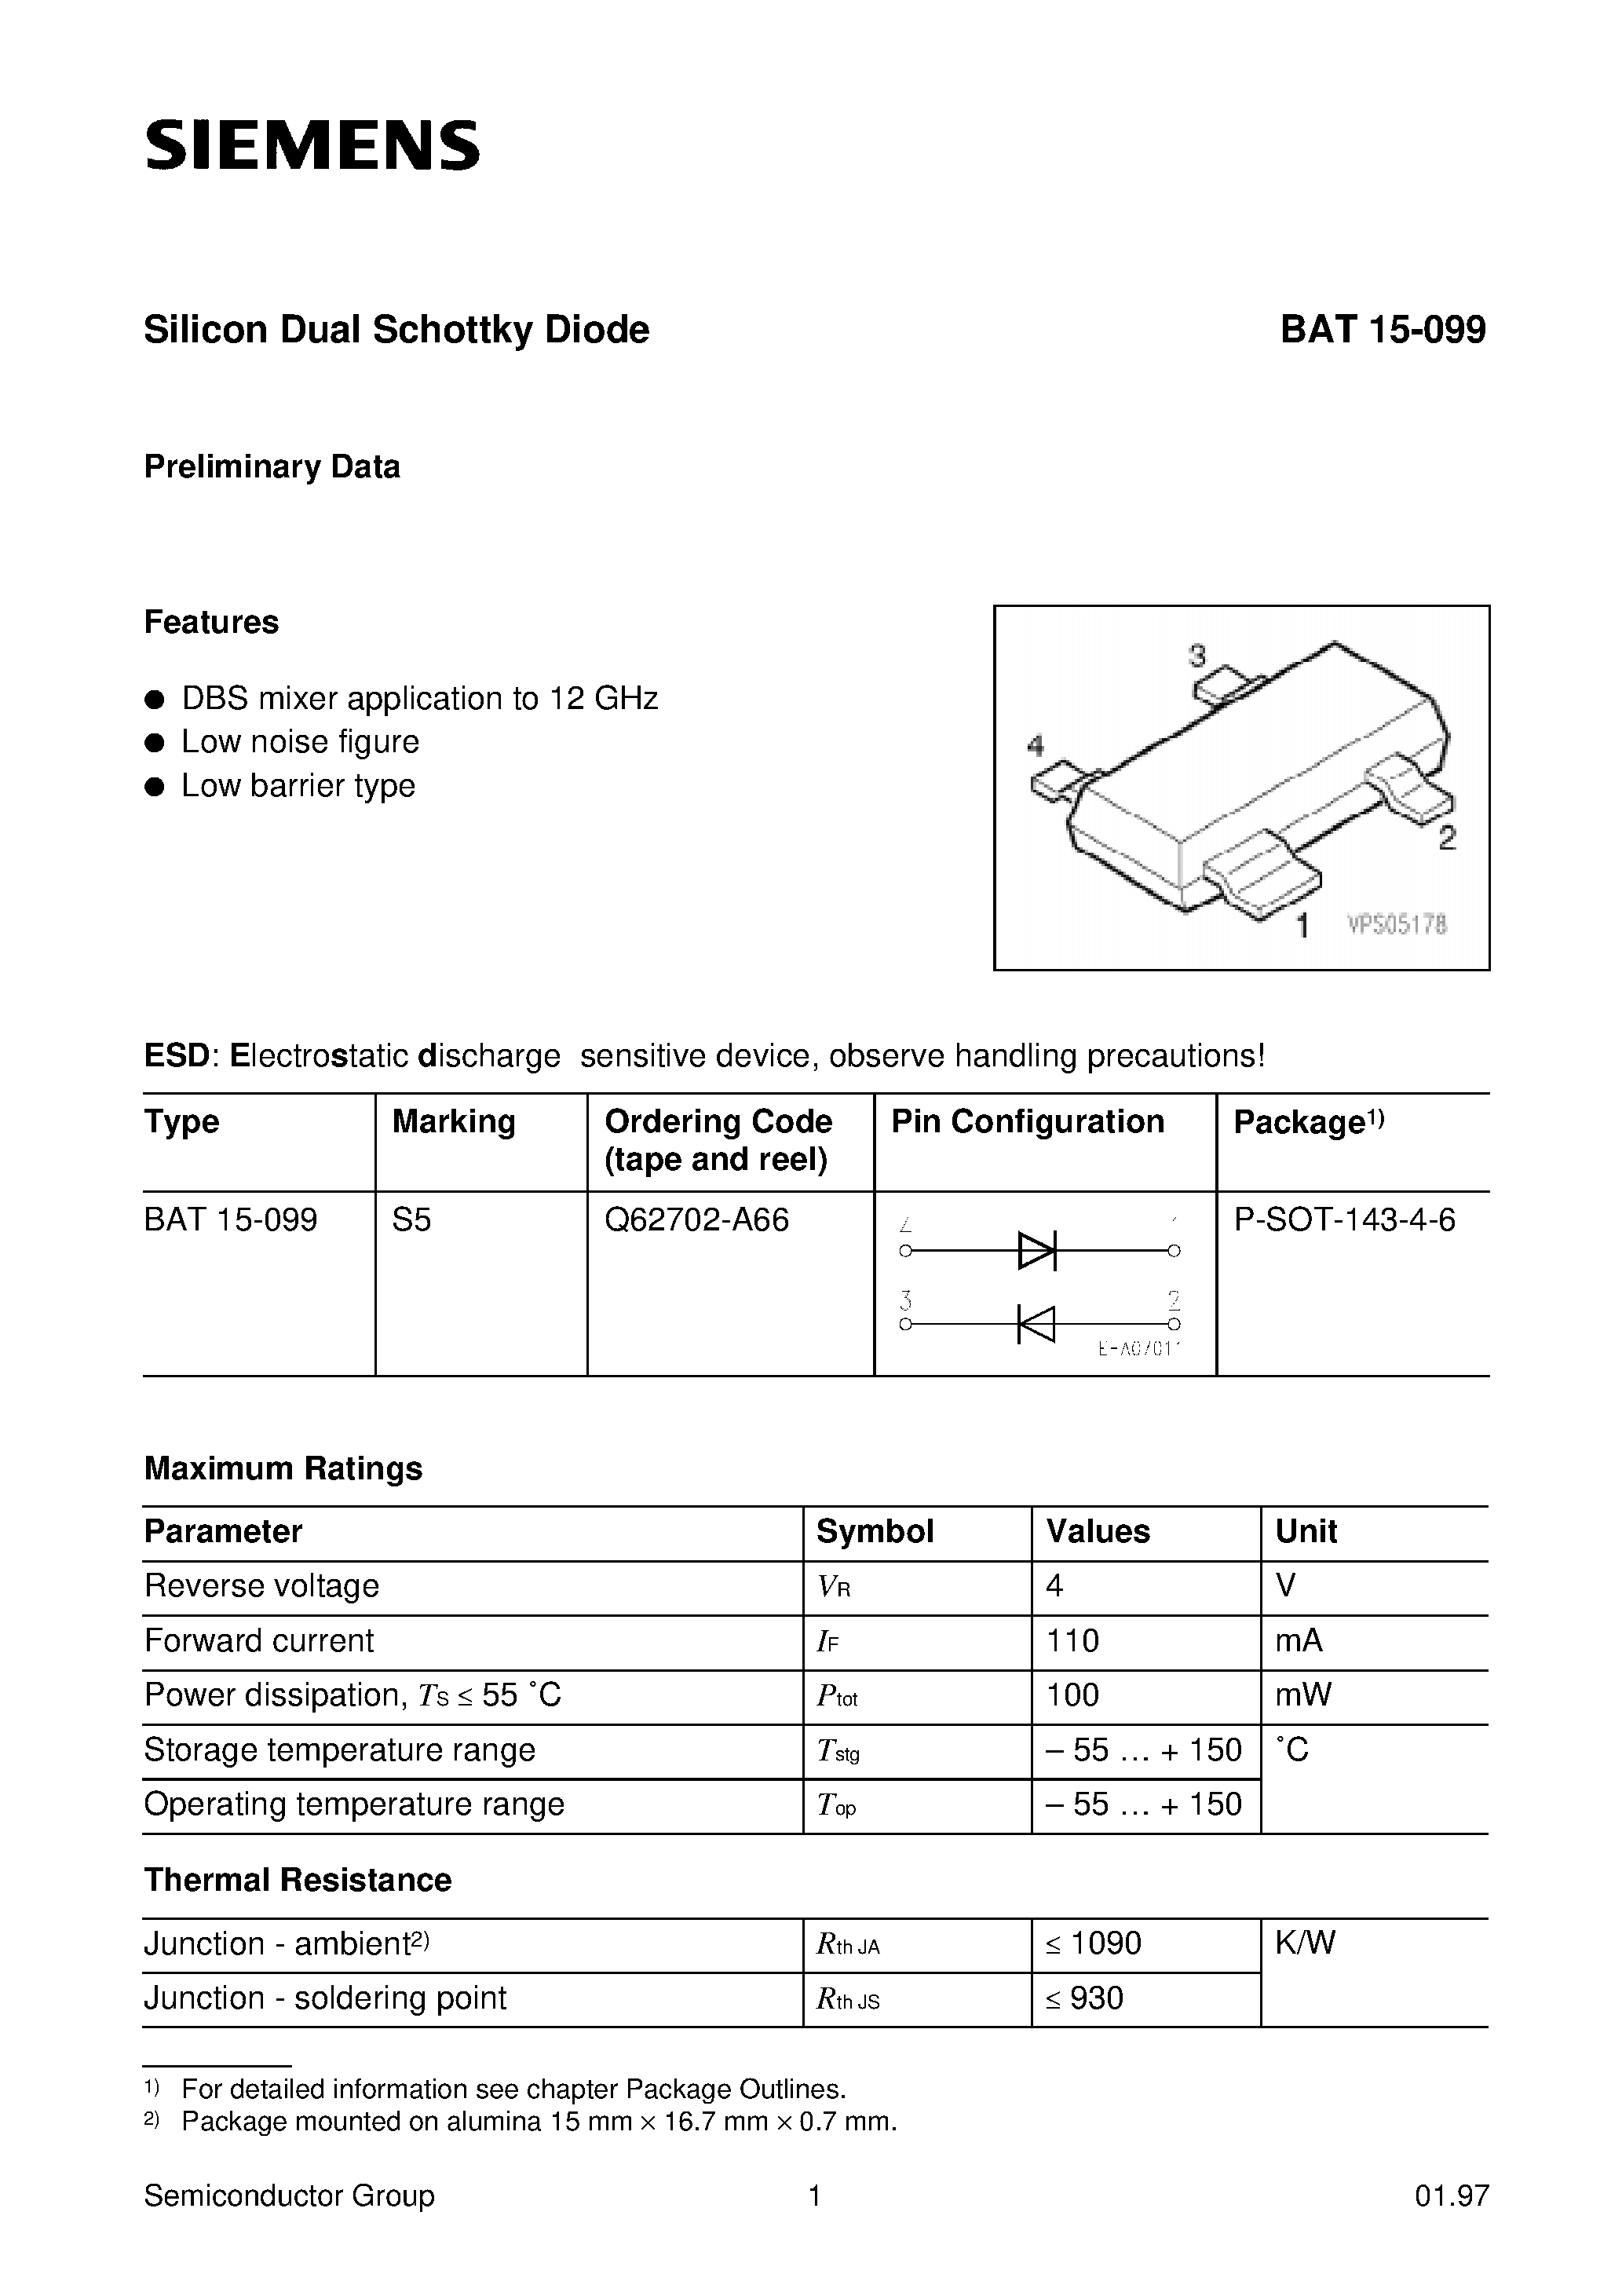 Datasheet BAT15-099 - Silicon Dual Schottky Diode (DBS mixer application to 12 GHz Low noise figure Low barrier type) page 1